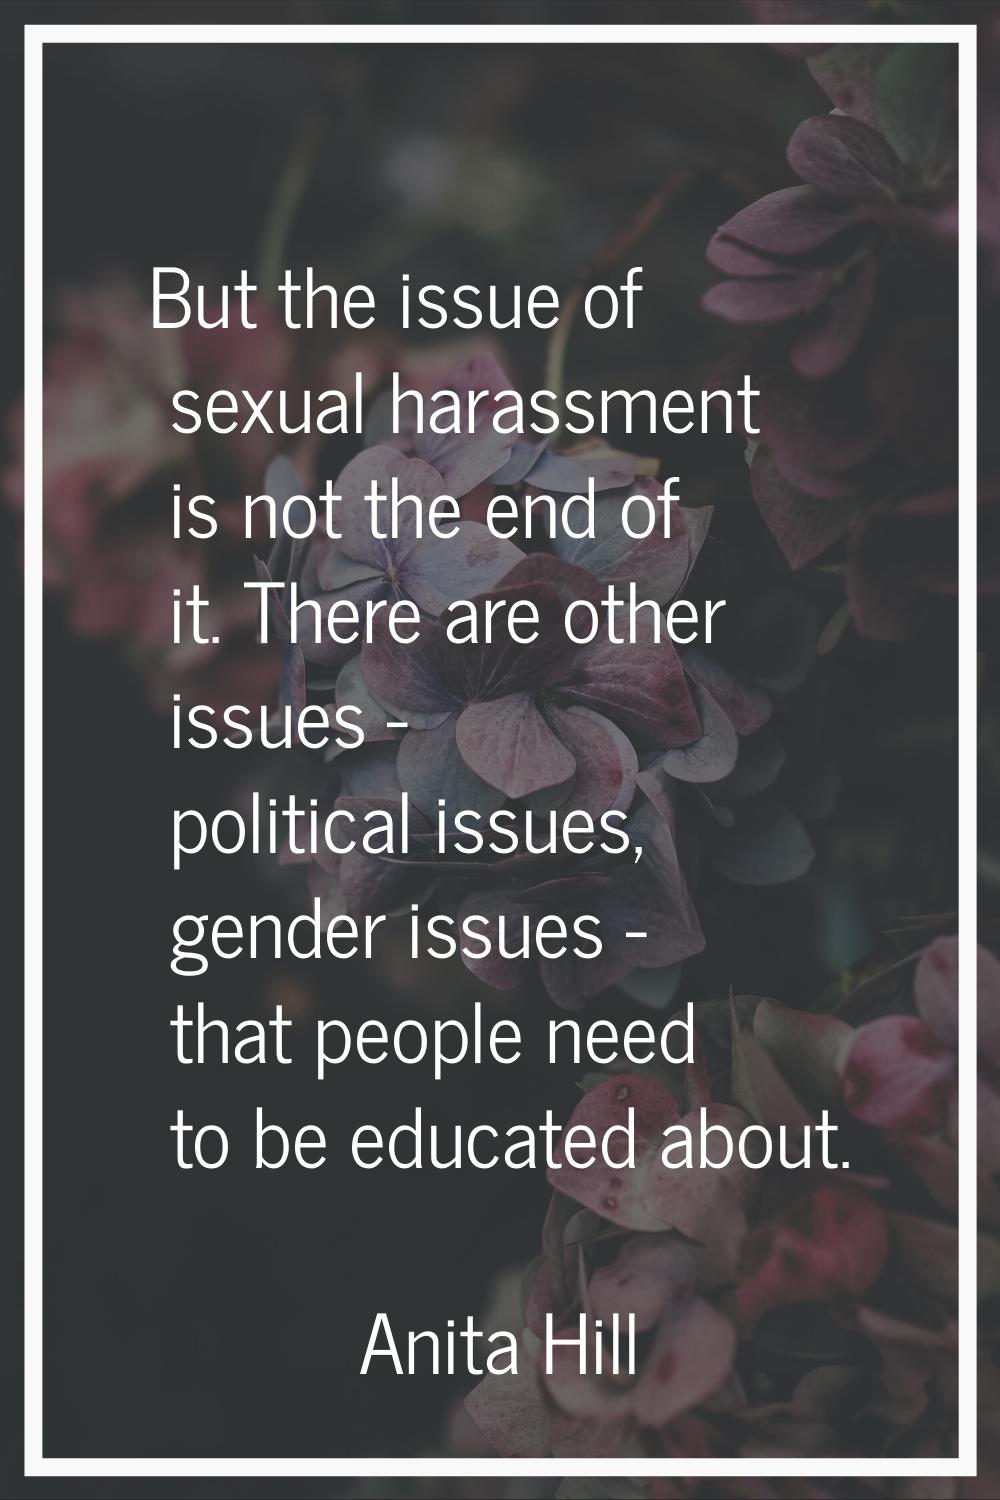 But the issue of sexual harassment is not the end of it. There are other issues - political issues,